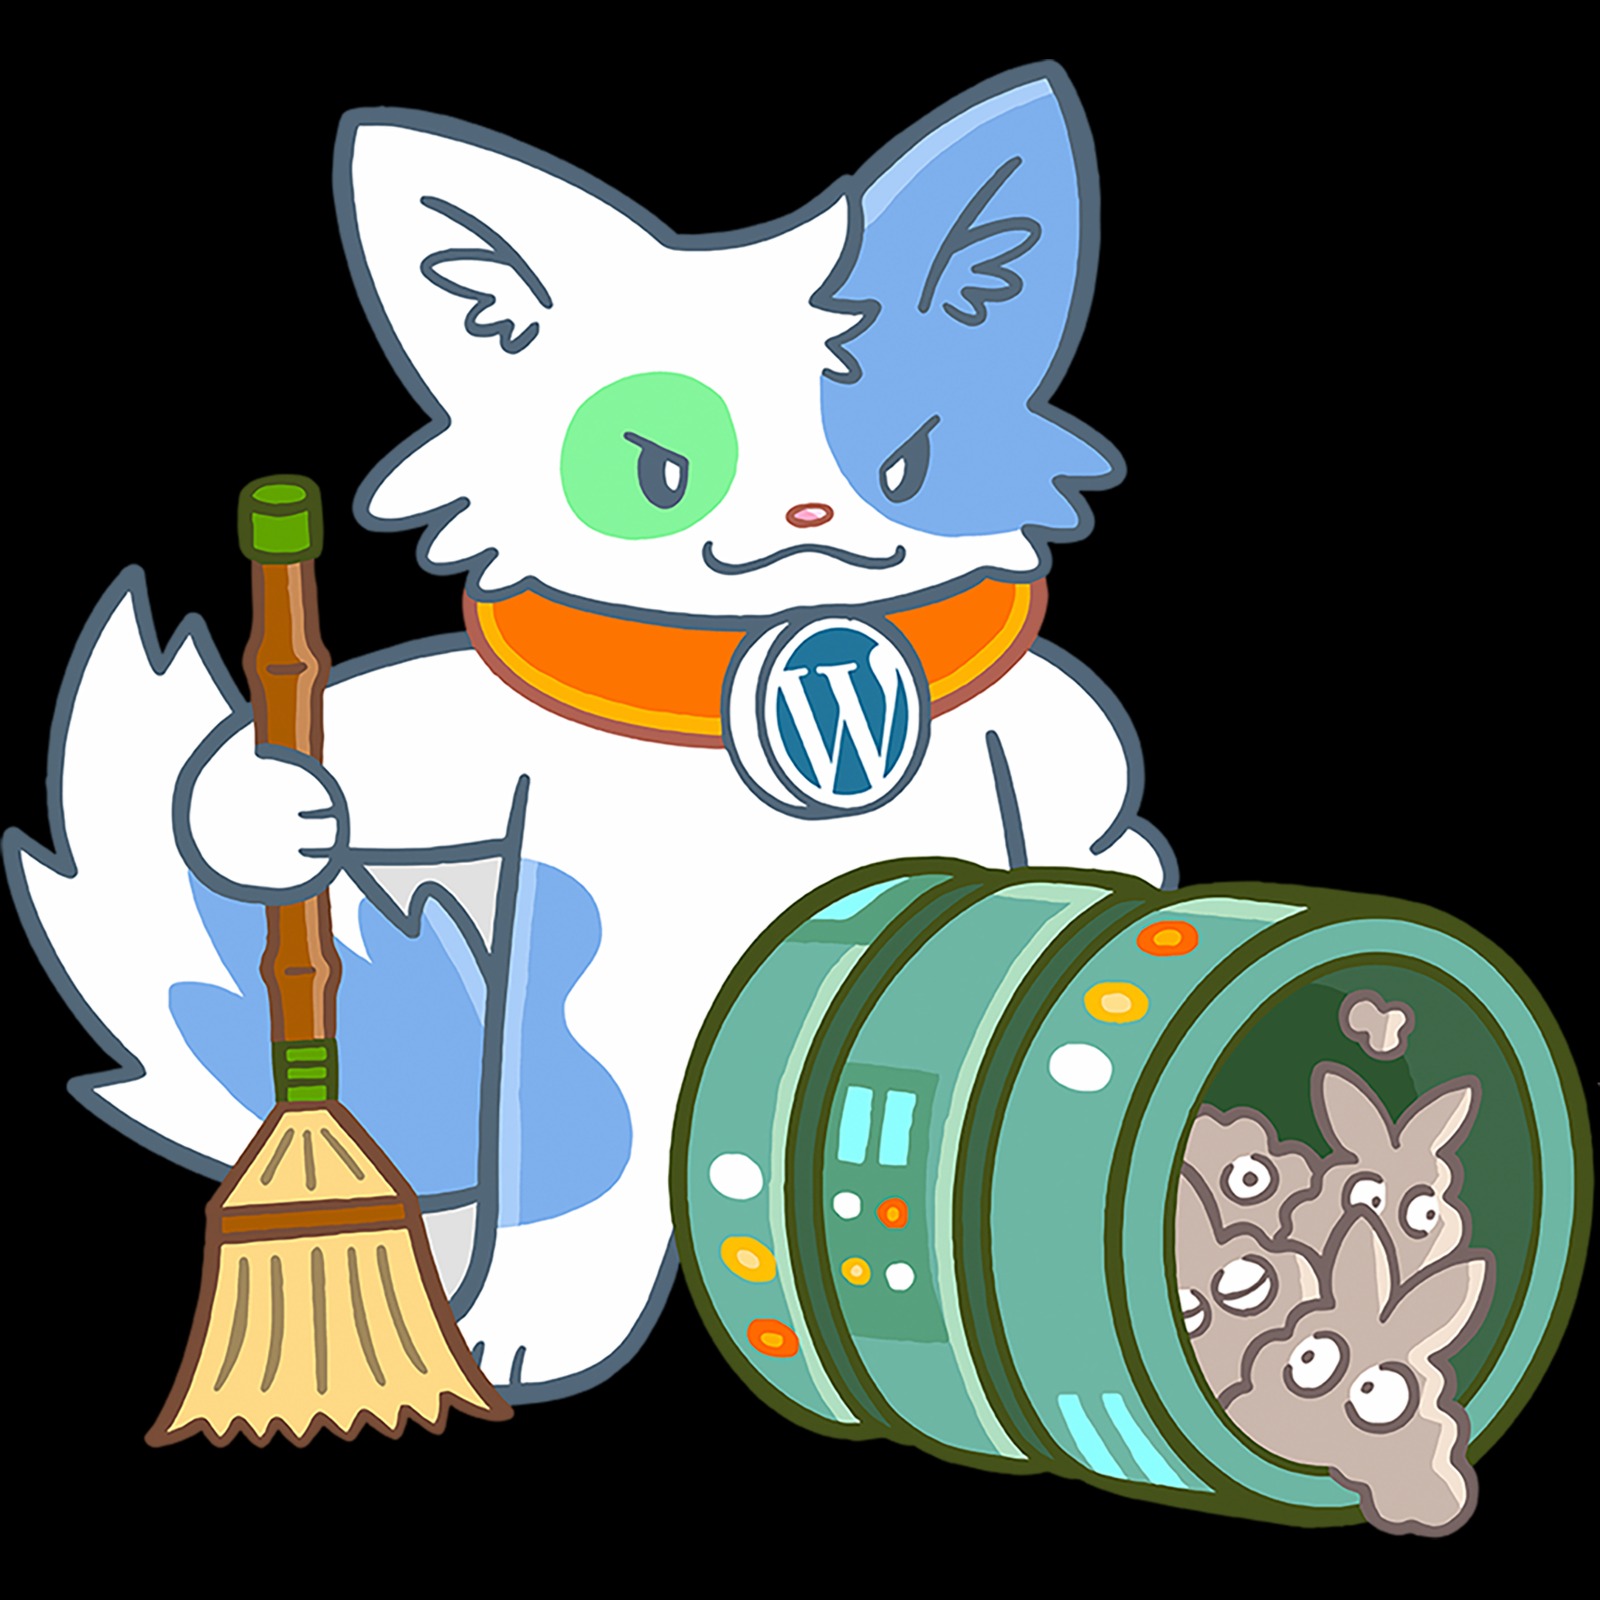 Meow Database Cleaner Pro [Activated] - Meow Database Cleaner Pro v1.0.3 by Meowapps Nulled Free Download